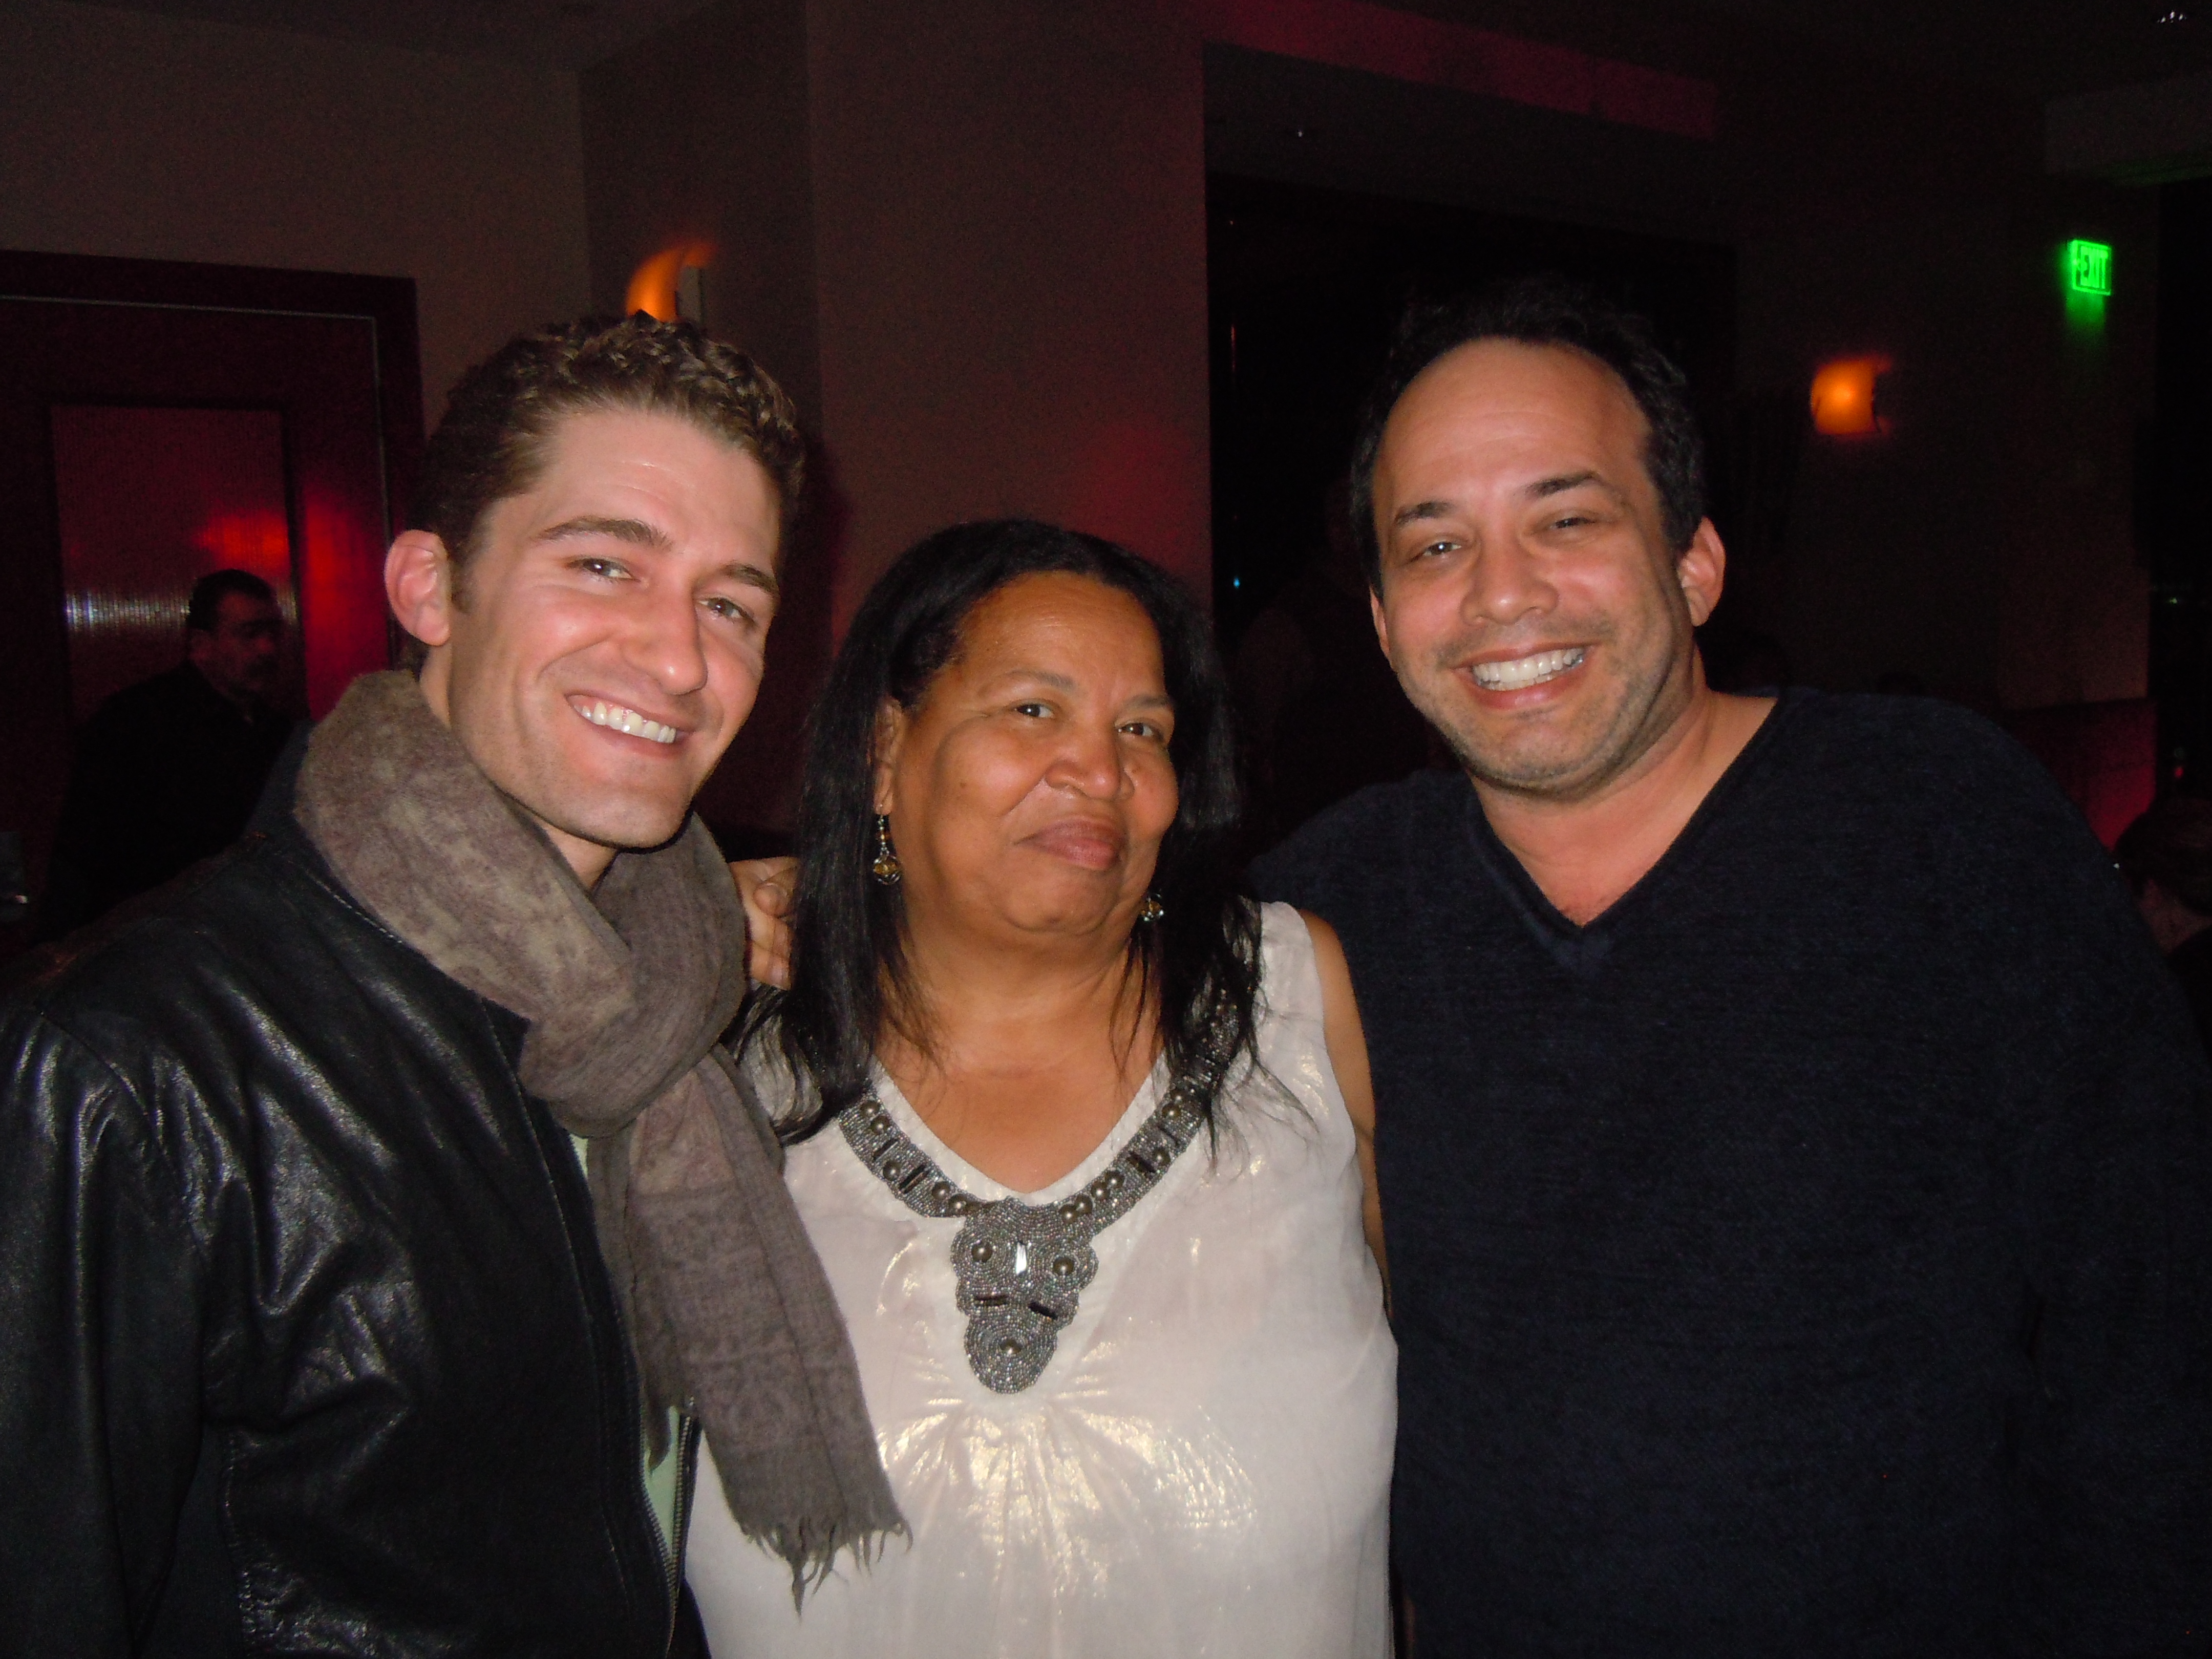 Michael Jay with actor Matthew Morrison and Stevi Meredith.